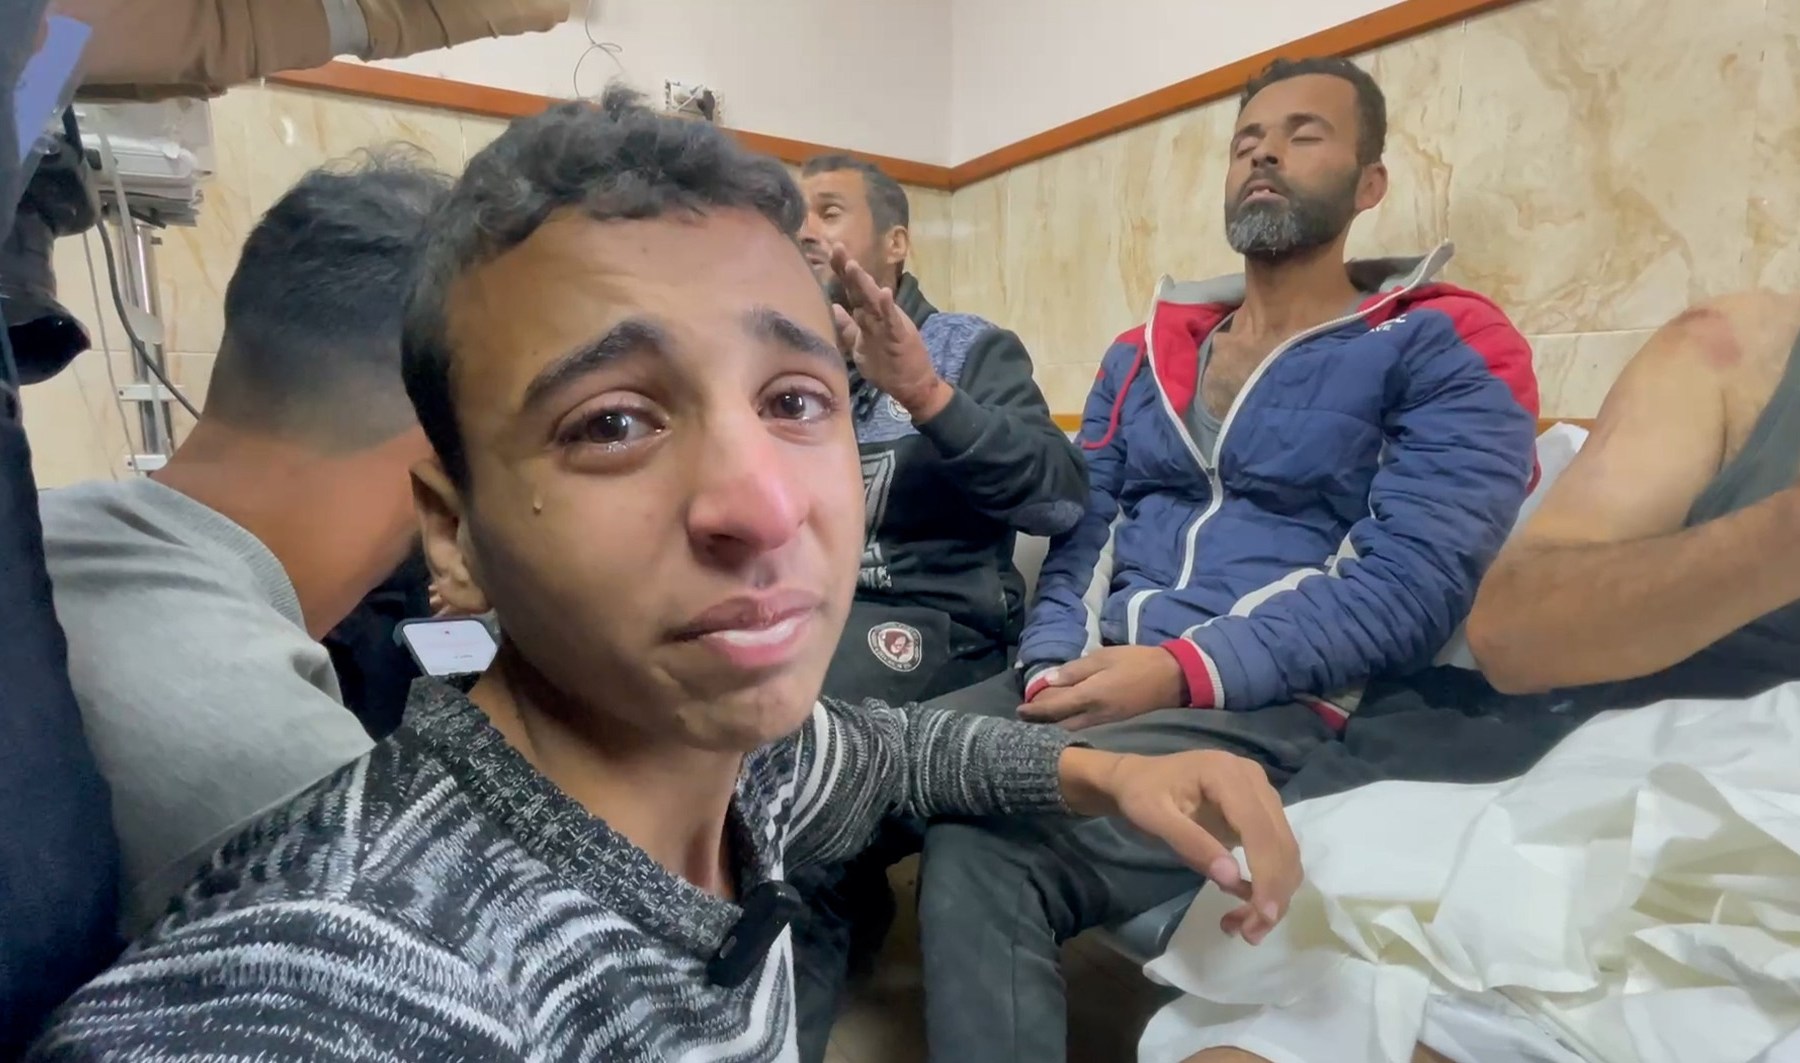 Palestinians speak of being stripped and abused by Israeli forces in Gaza | Israel-Palestine conflict #Palestinians #speak #stripped #abused #Israeli #forces #Gaza #IsraelPalestine #conflict